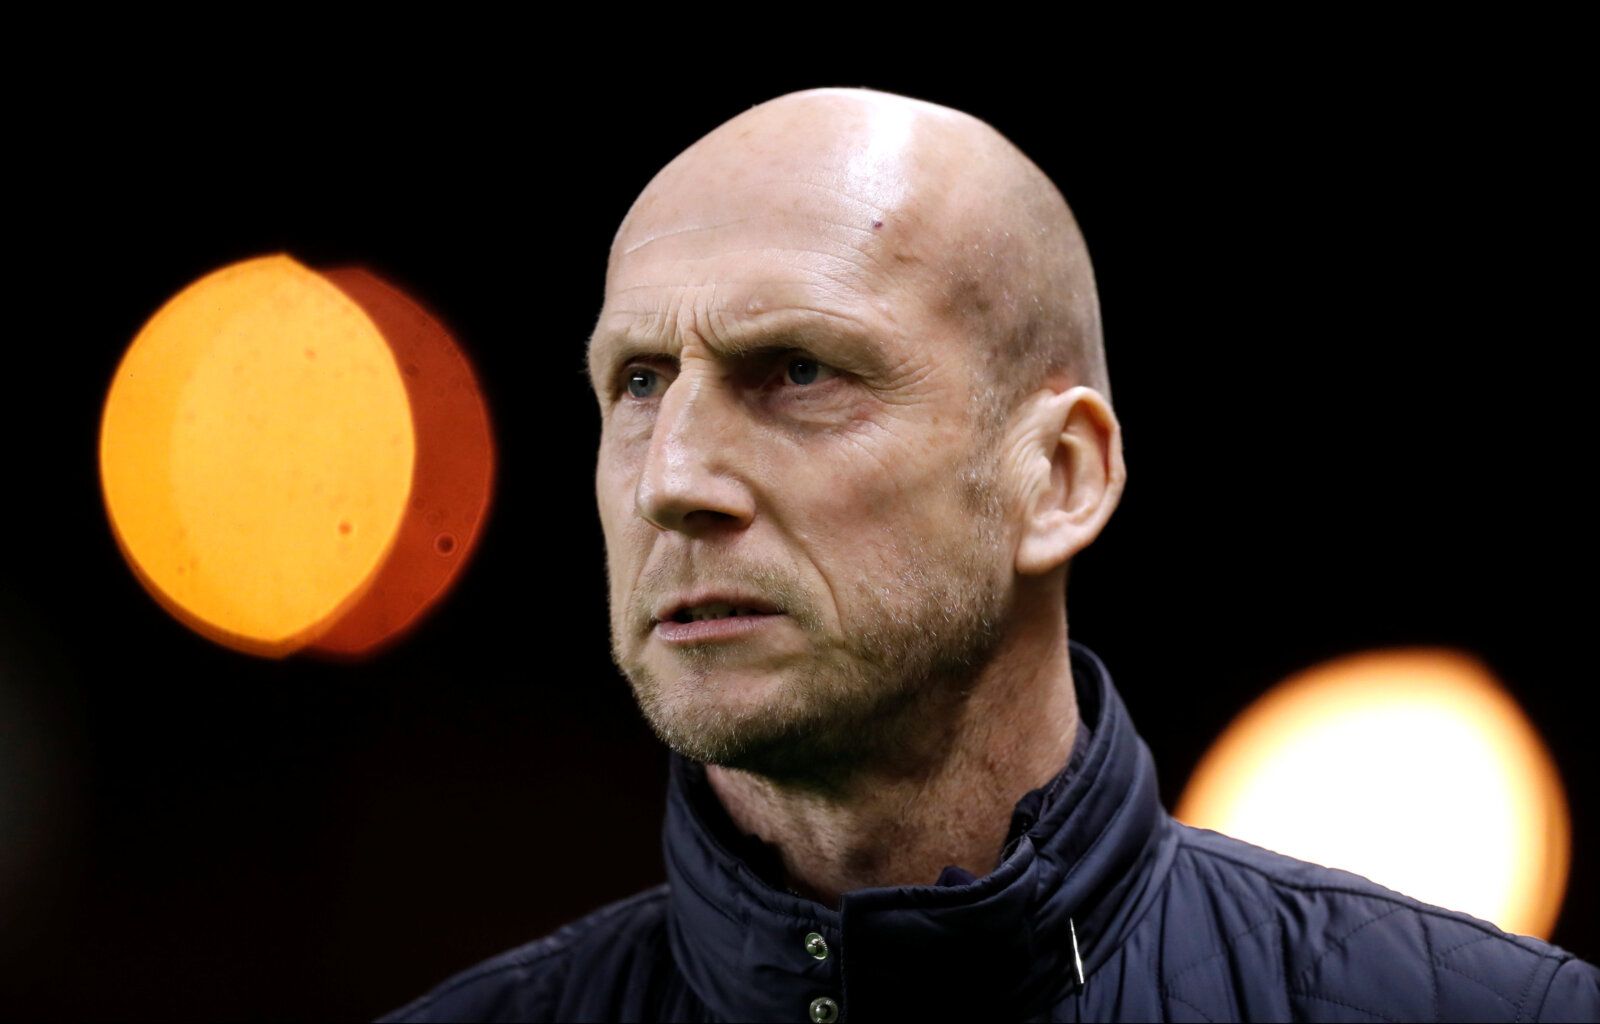 Soccer Football - Championship - Wolverhampton Wanderers vs Reading - Molineux Stadium, Wolverhampton, Britain - March 13, 2018   Reading manager Jaap Stam    Action Images/Peter Cziborra    EDITORIAL USE ONLY. No use with unauthorized audio, video, data, fixture lists, club/league logos or 